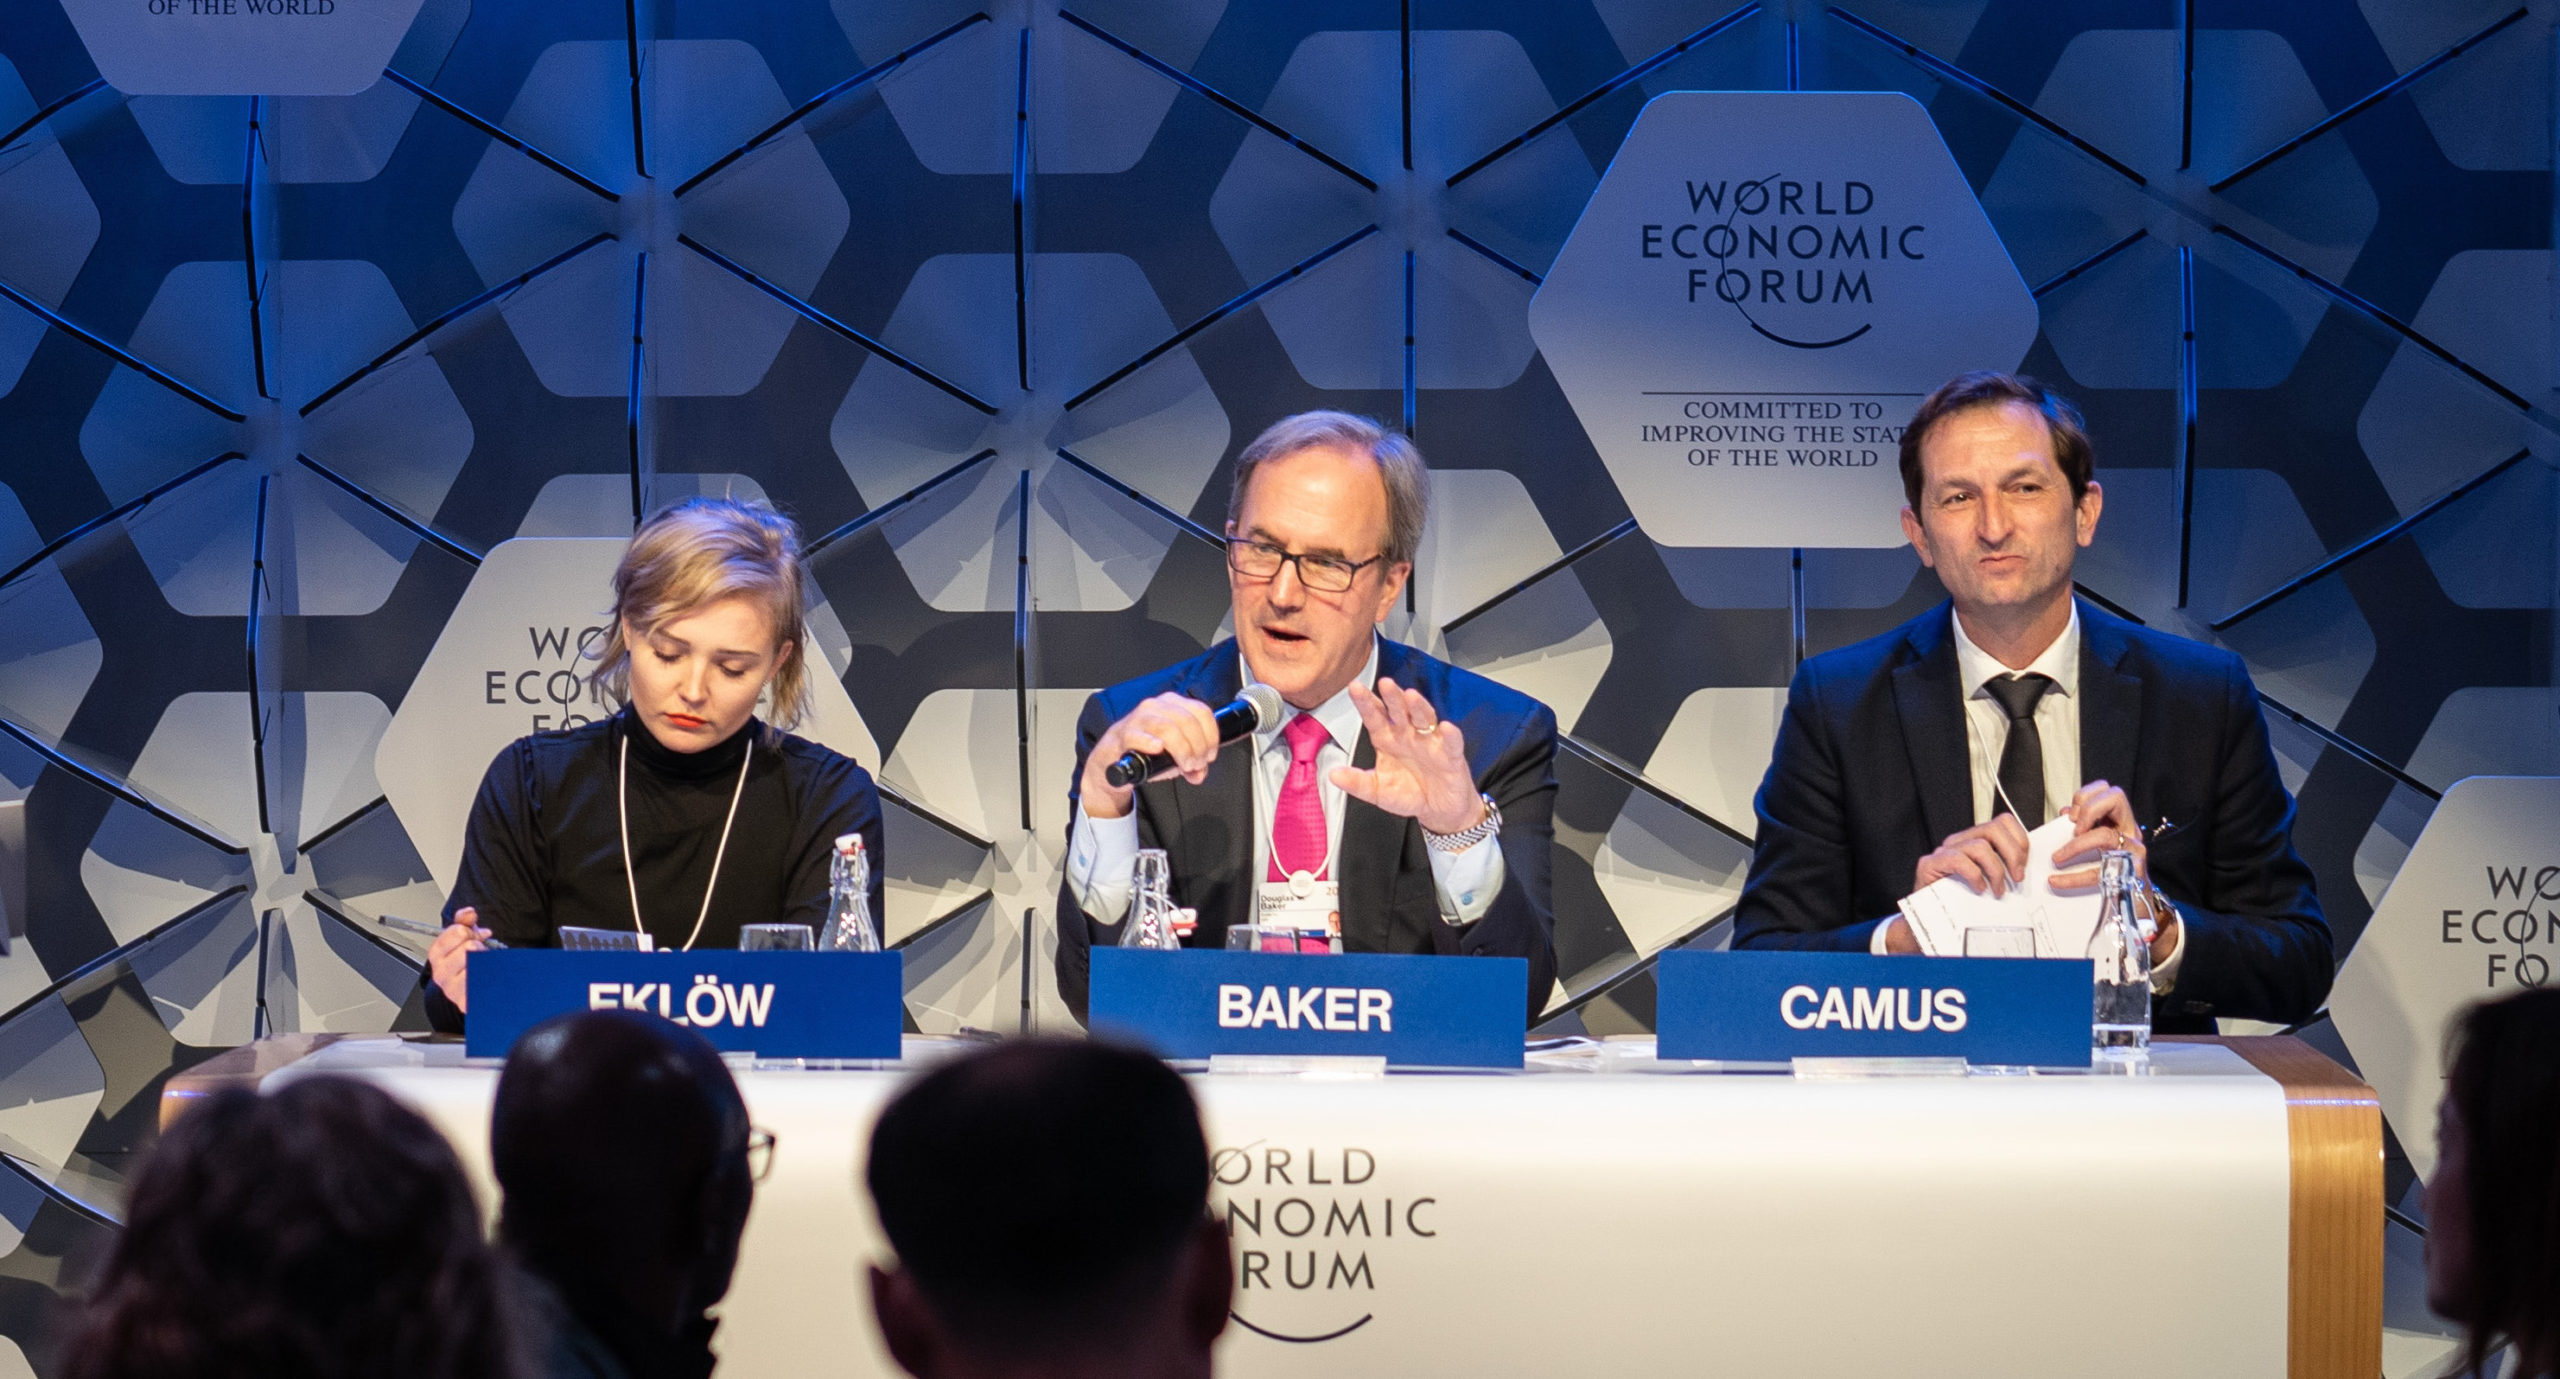 ”What it’s like at Davos when you’re much younger and astronomically poorer than everybody else”